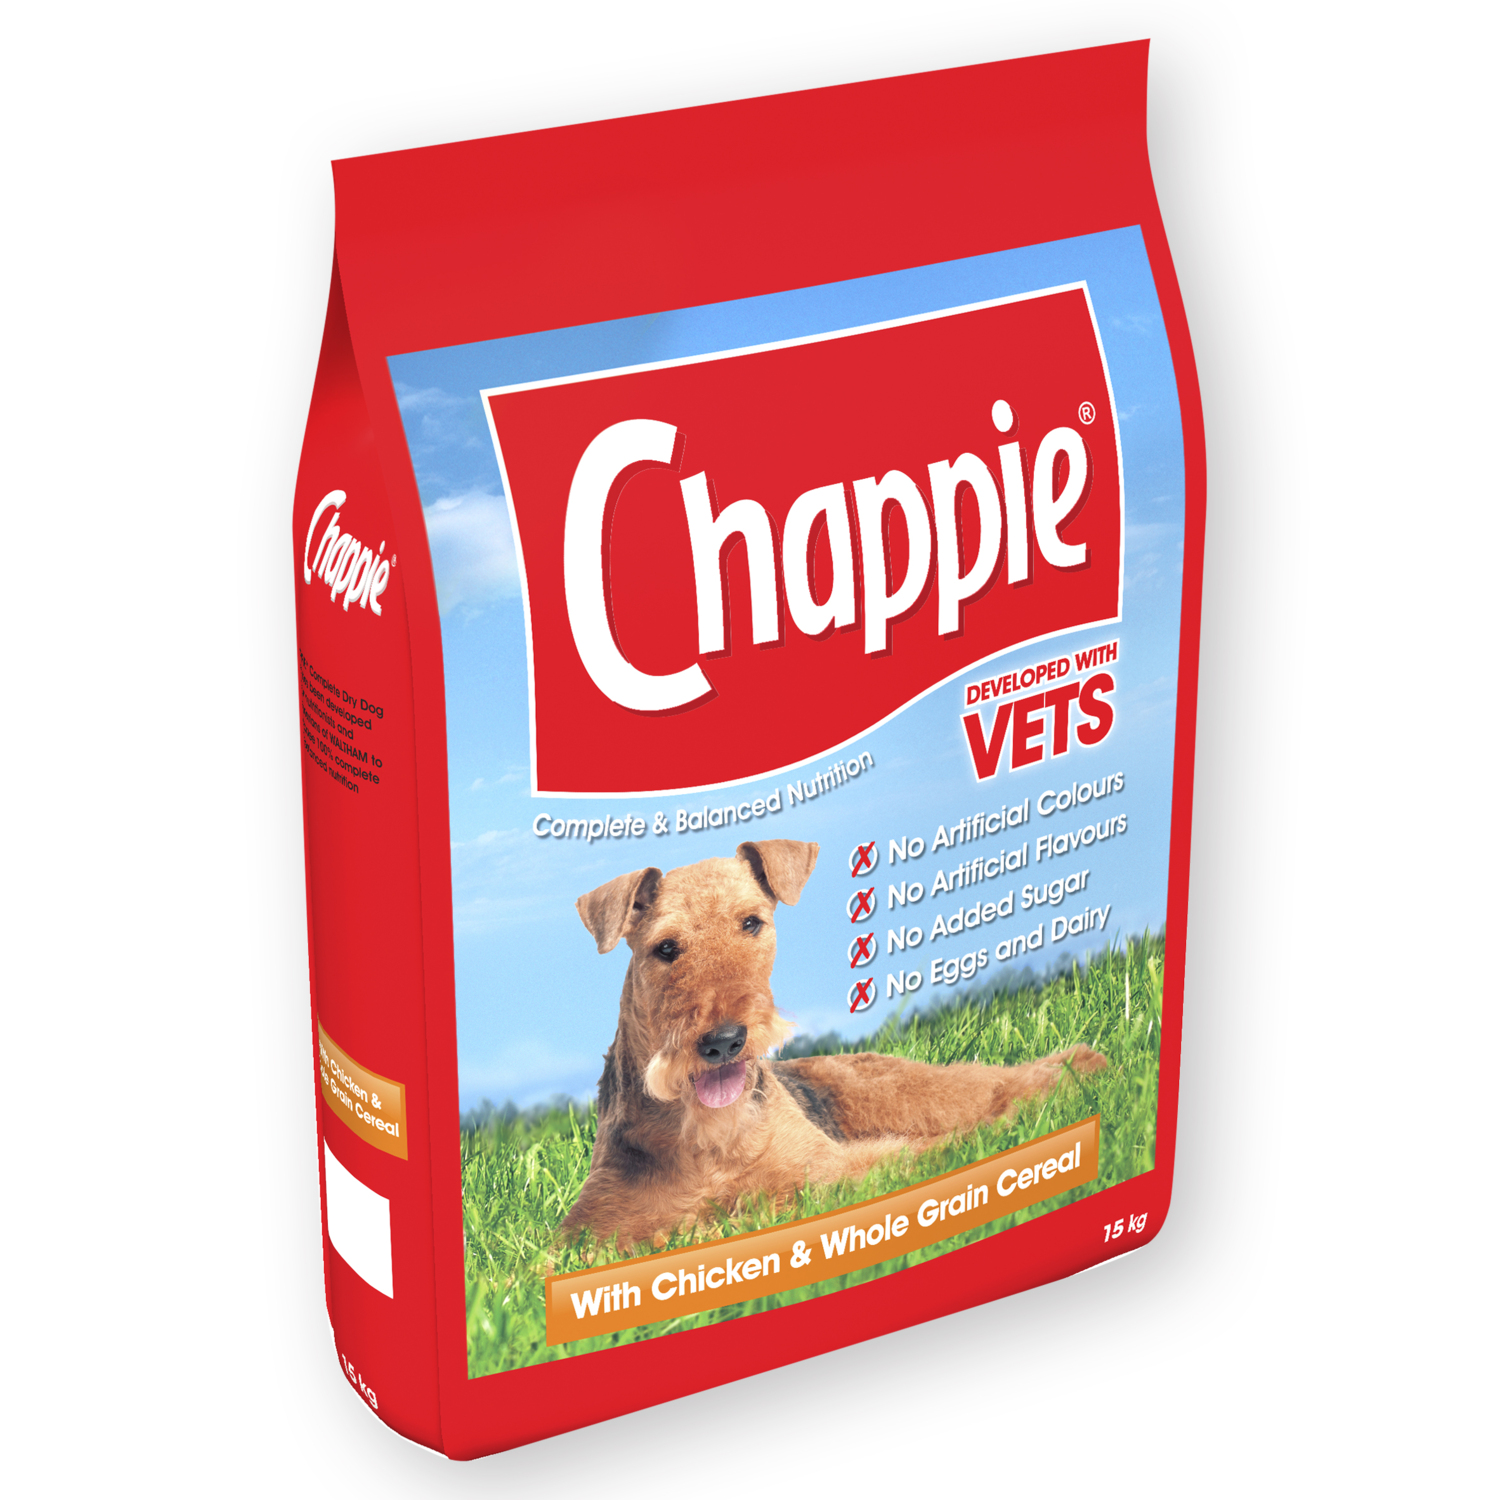 Chappie Complete and Balanced Nutrition Chicken and Cereal Dog Food 15kg Image